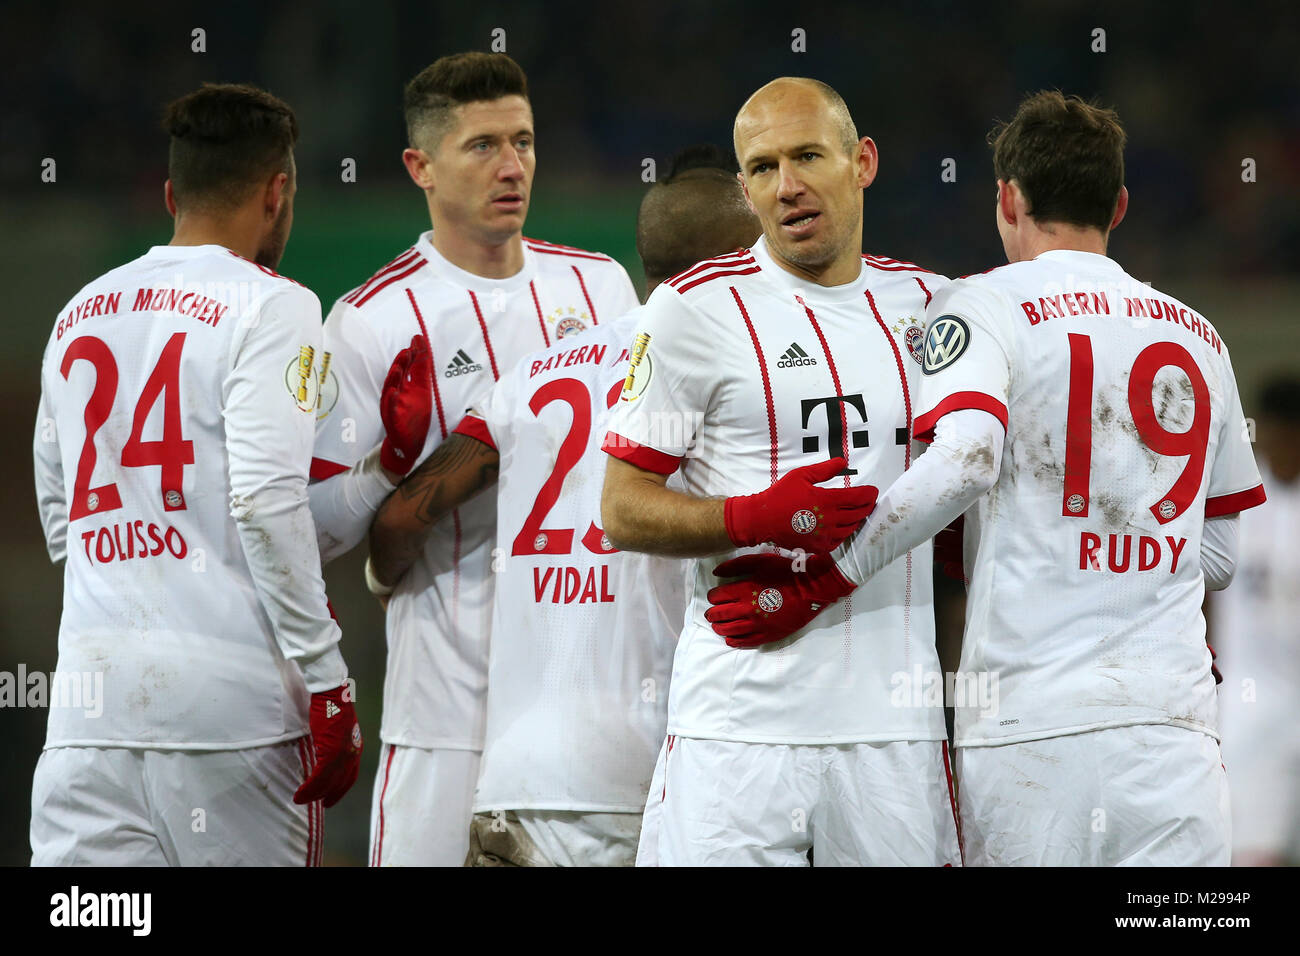 (180207) -- PADERBORN, Feb. 7, 2018(Xinhua) -- Arjen Robben (2nd R) of Bayern Munich celebrates with teammates after scoring during the quarterfinal match of German Cup between SC Paderborn and Bayern Munich at Benteler Arena in Paderborn, Germany, on Feb. 6, 2018. Bayern Munich won 6-0. (Xinhua/Ulrich Hufnagel) Stock Photo